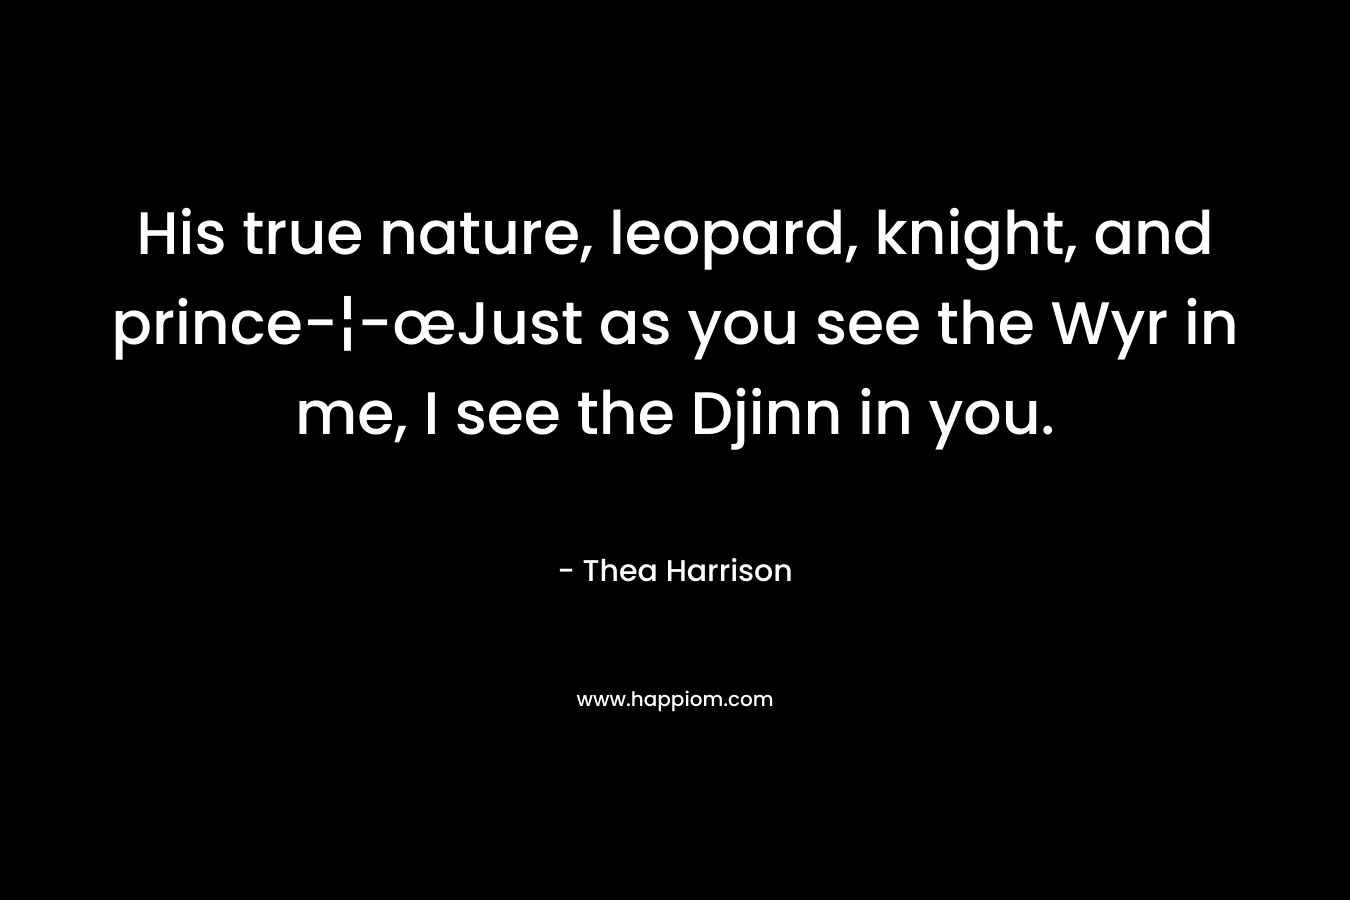 His true nature, leopard, knight, and prince-¦-œJust as you see the Wyr in me, I see the Djinn in you. – Thea Harrison